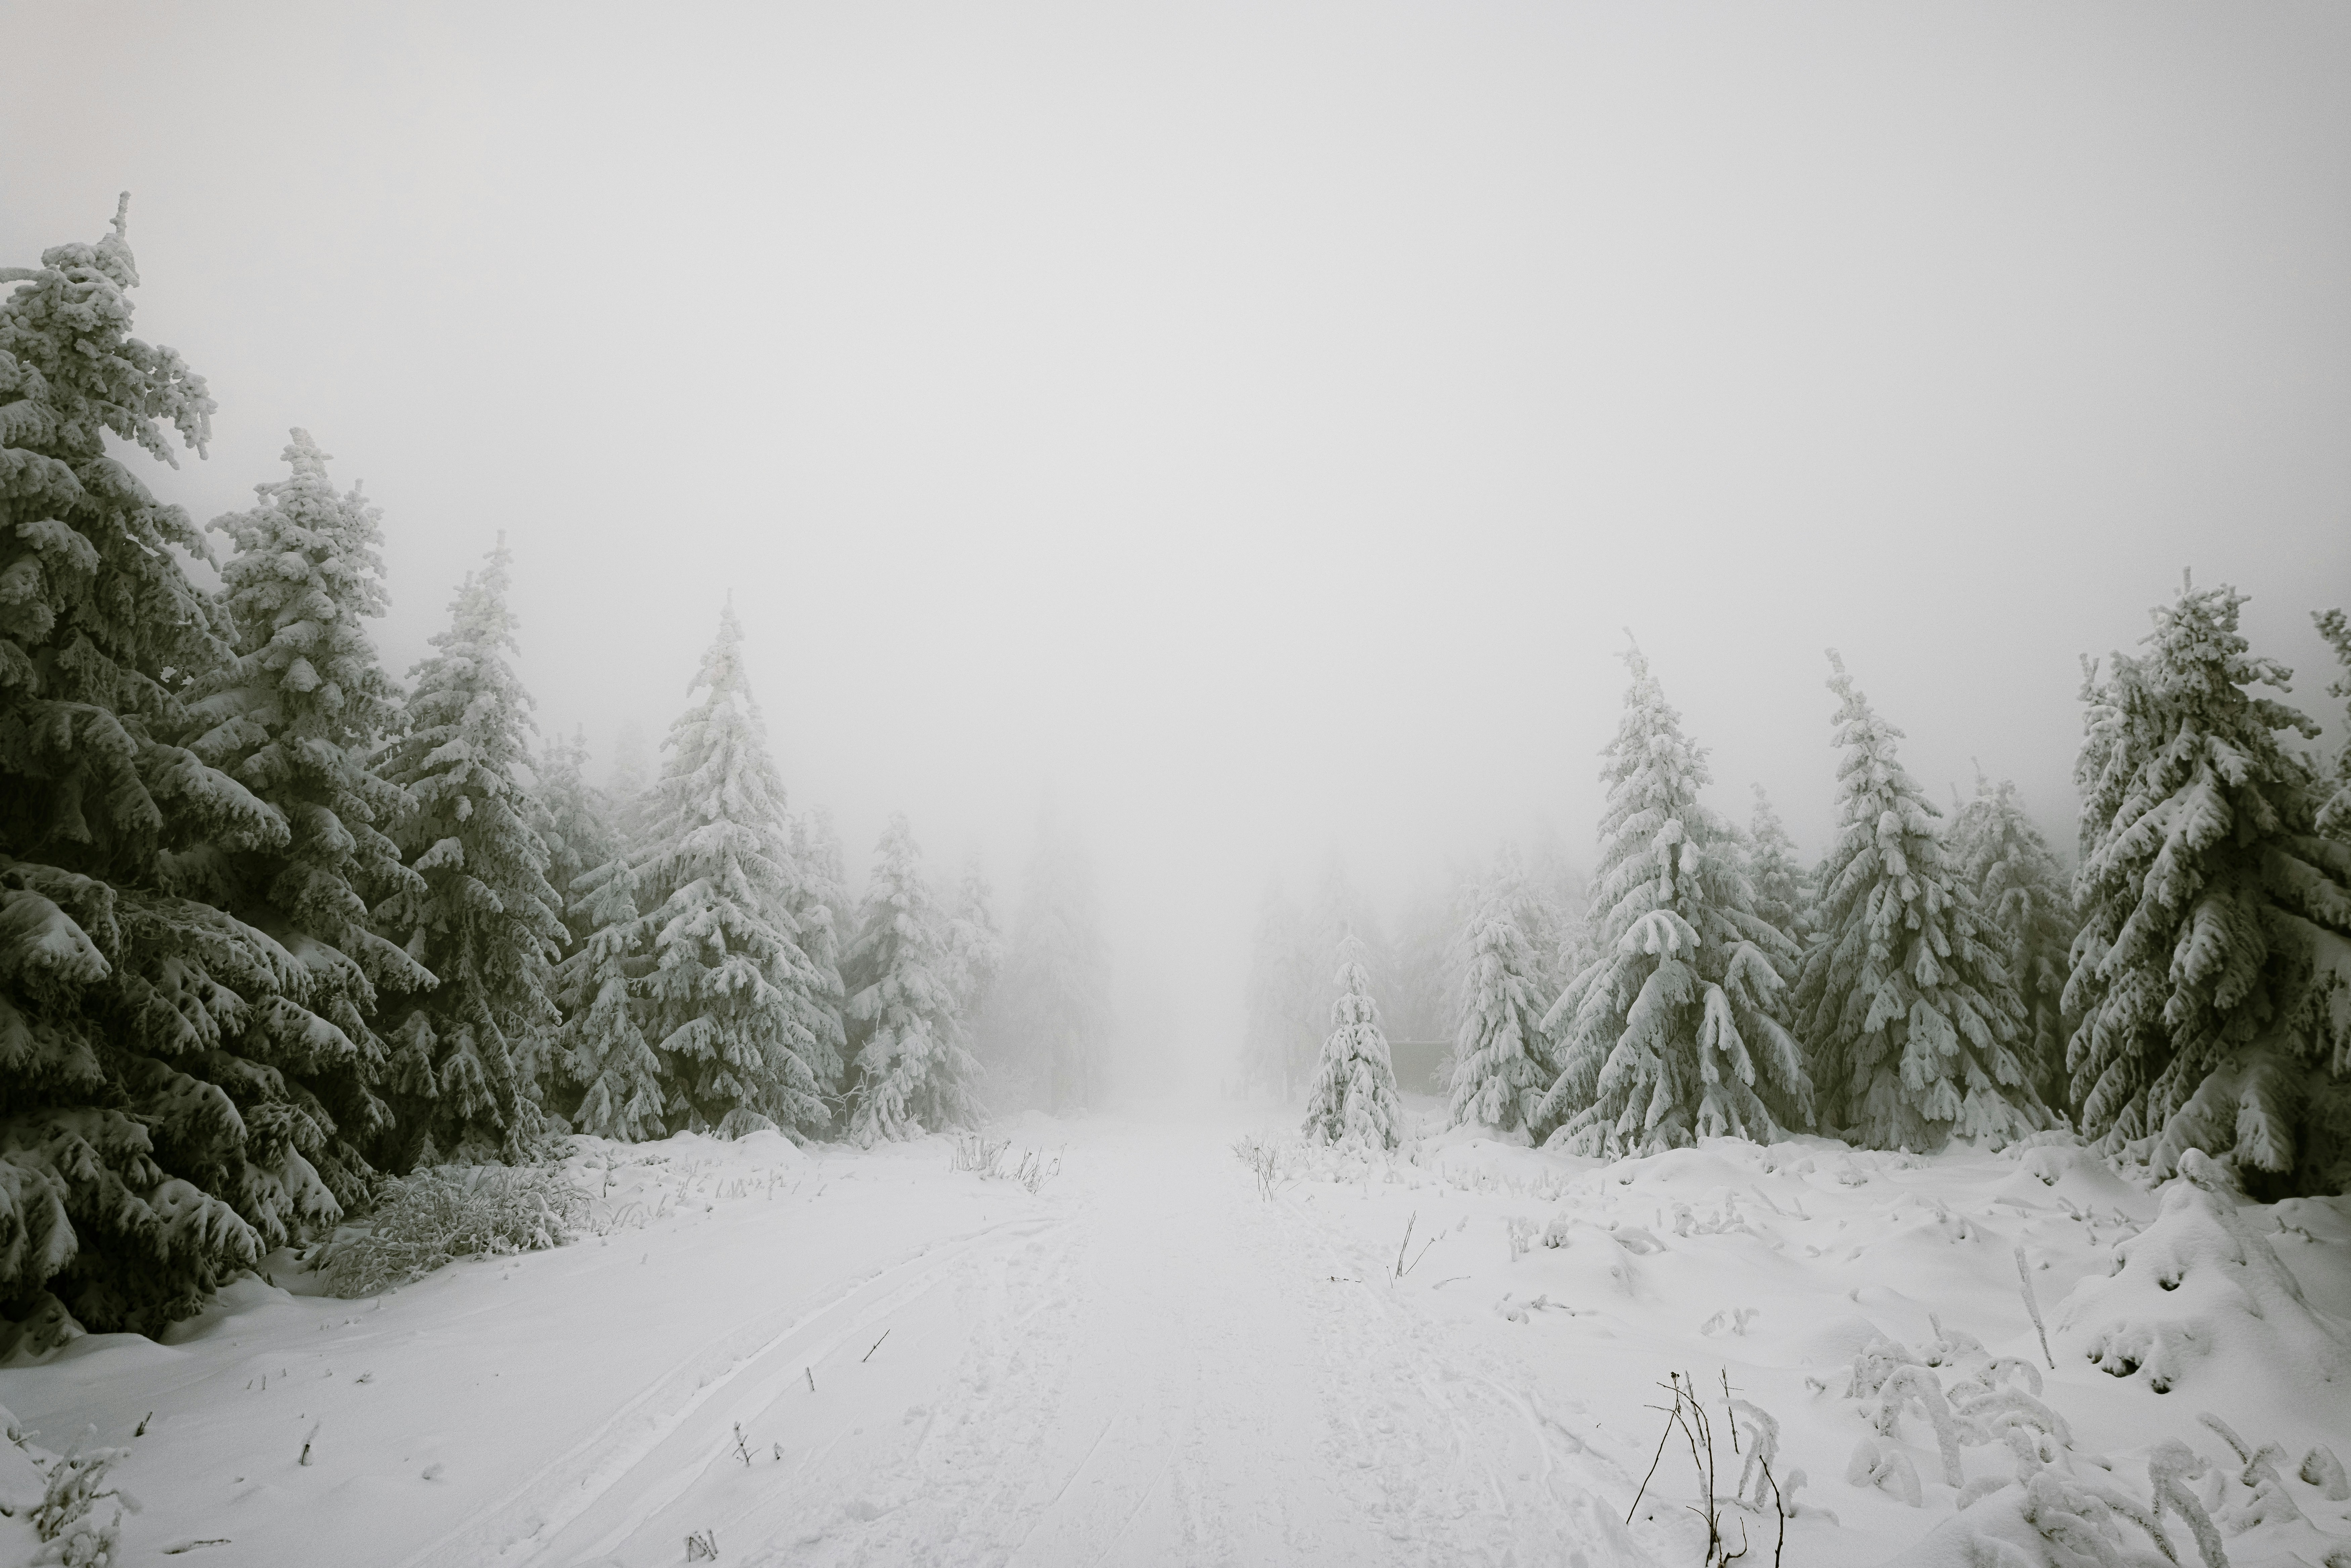 General 7000x4669 winter snow forest landscape nature trees pine trees mist photography depth of field snow covered